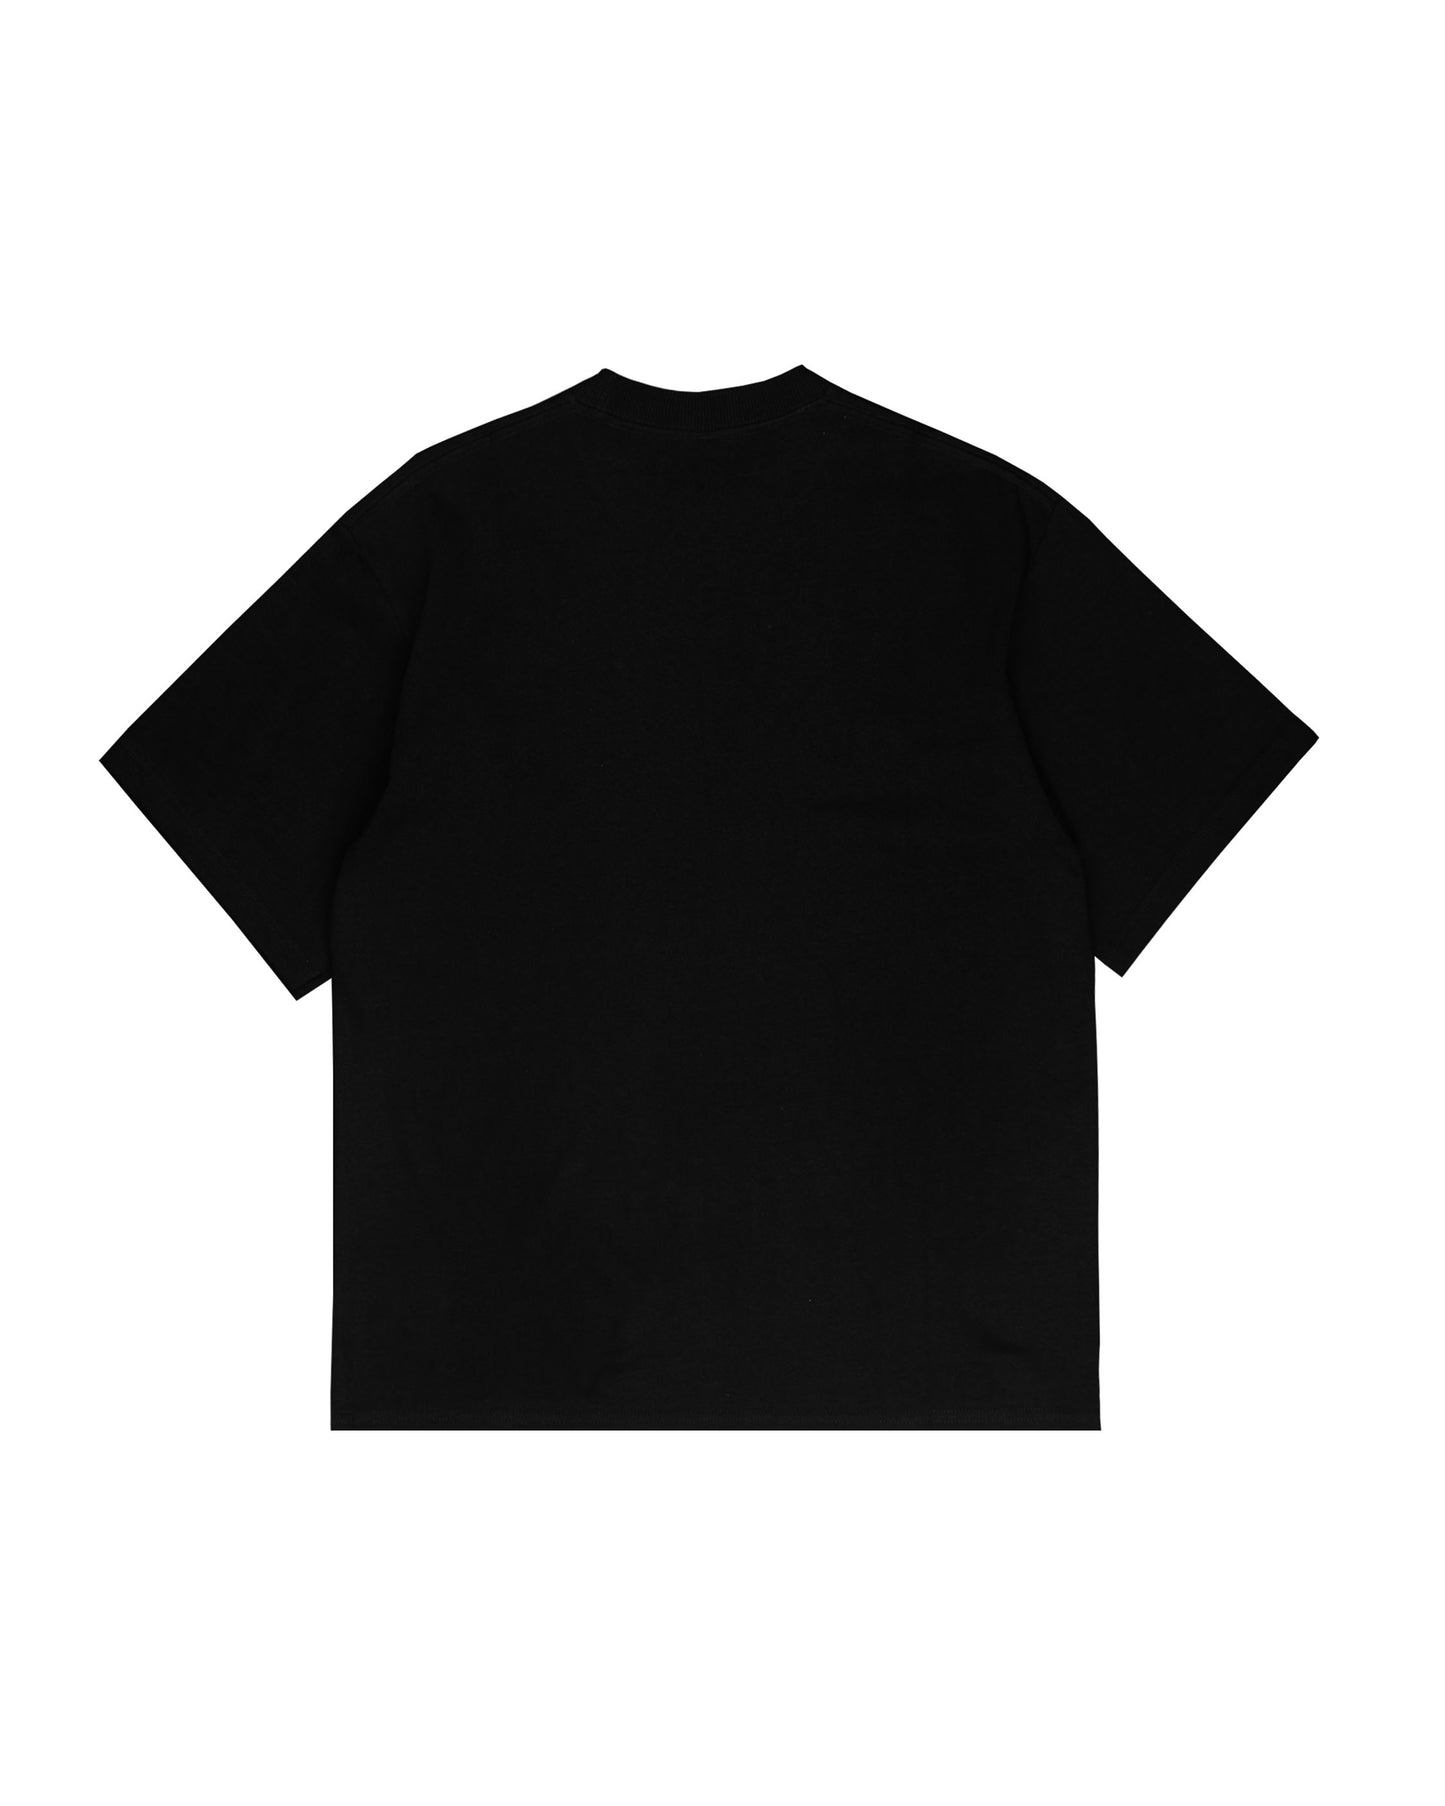 Sator Black Relaxed Fit Tees